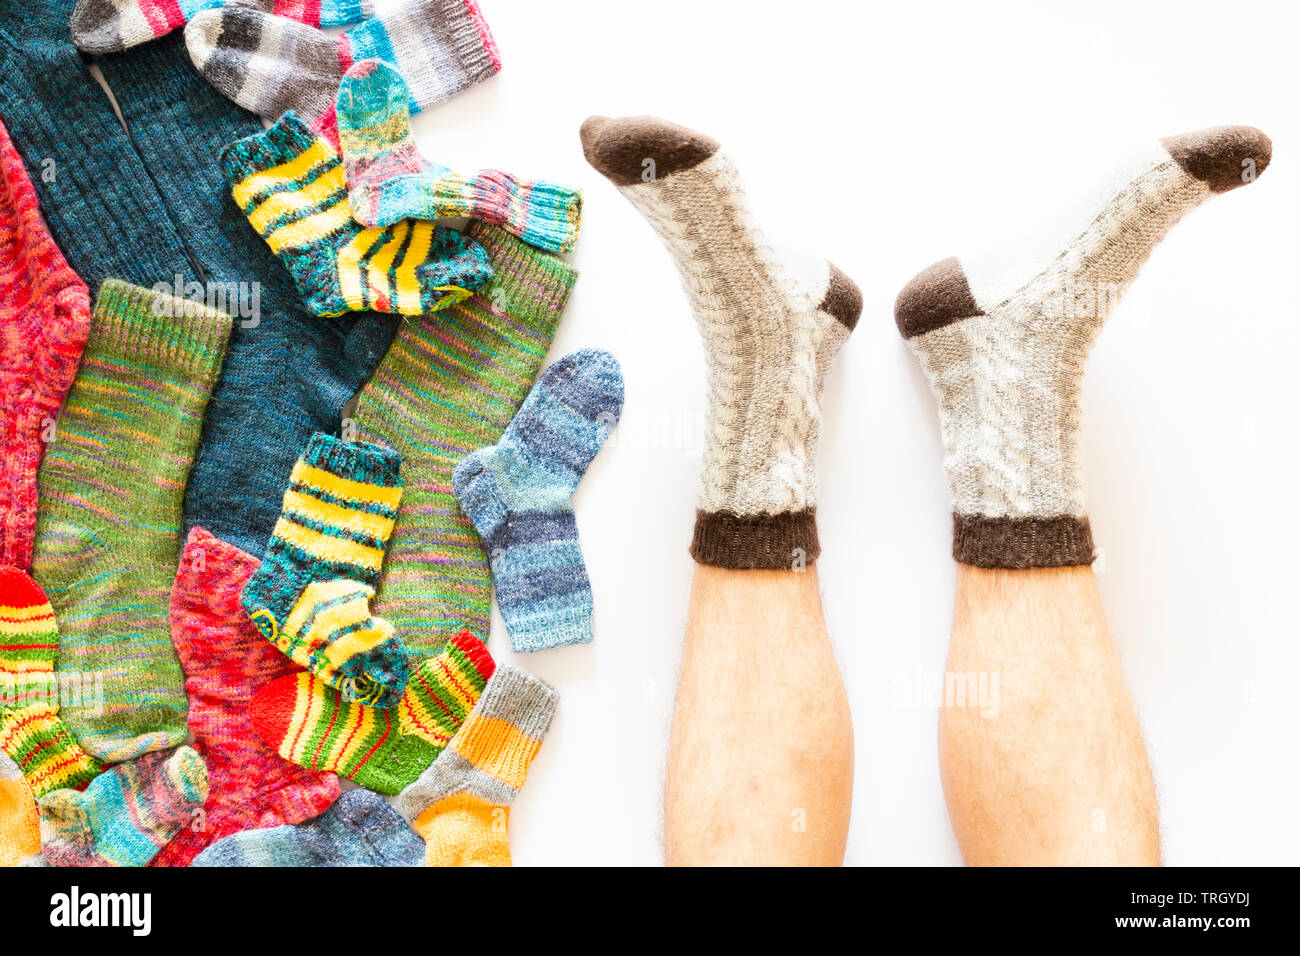 Top view of an assortment of colorful woolen socks of various sizes on white background with a pair of feet wearing gray brown socks Stock Photo